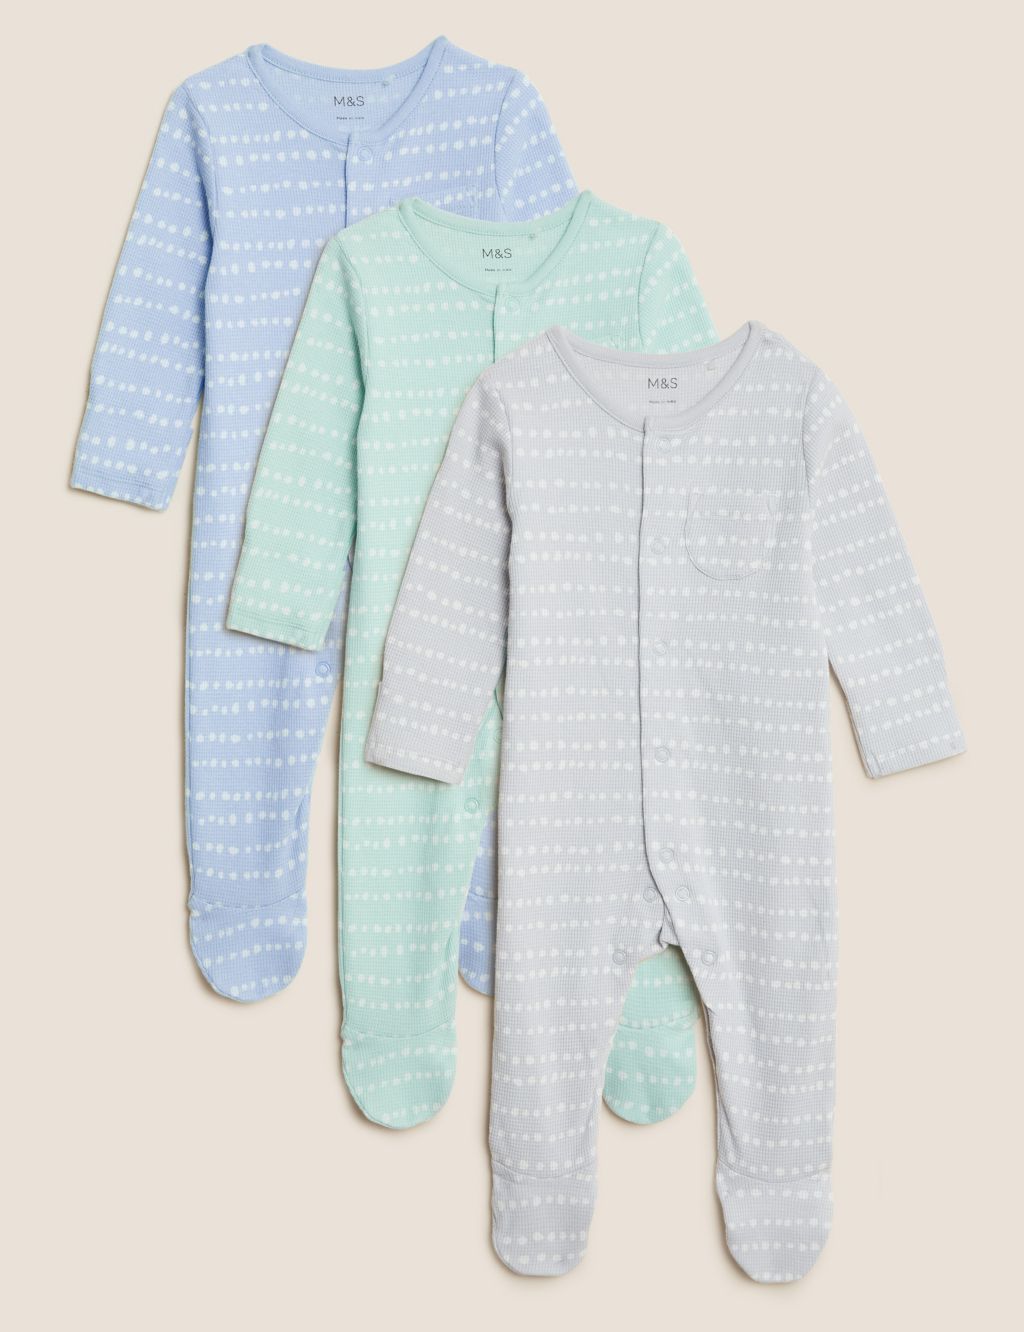 3pk Pure Cotton Striped Sleepsuits (61/2lbs - 3 Yrs) image 1